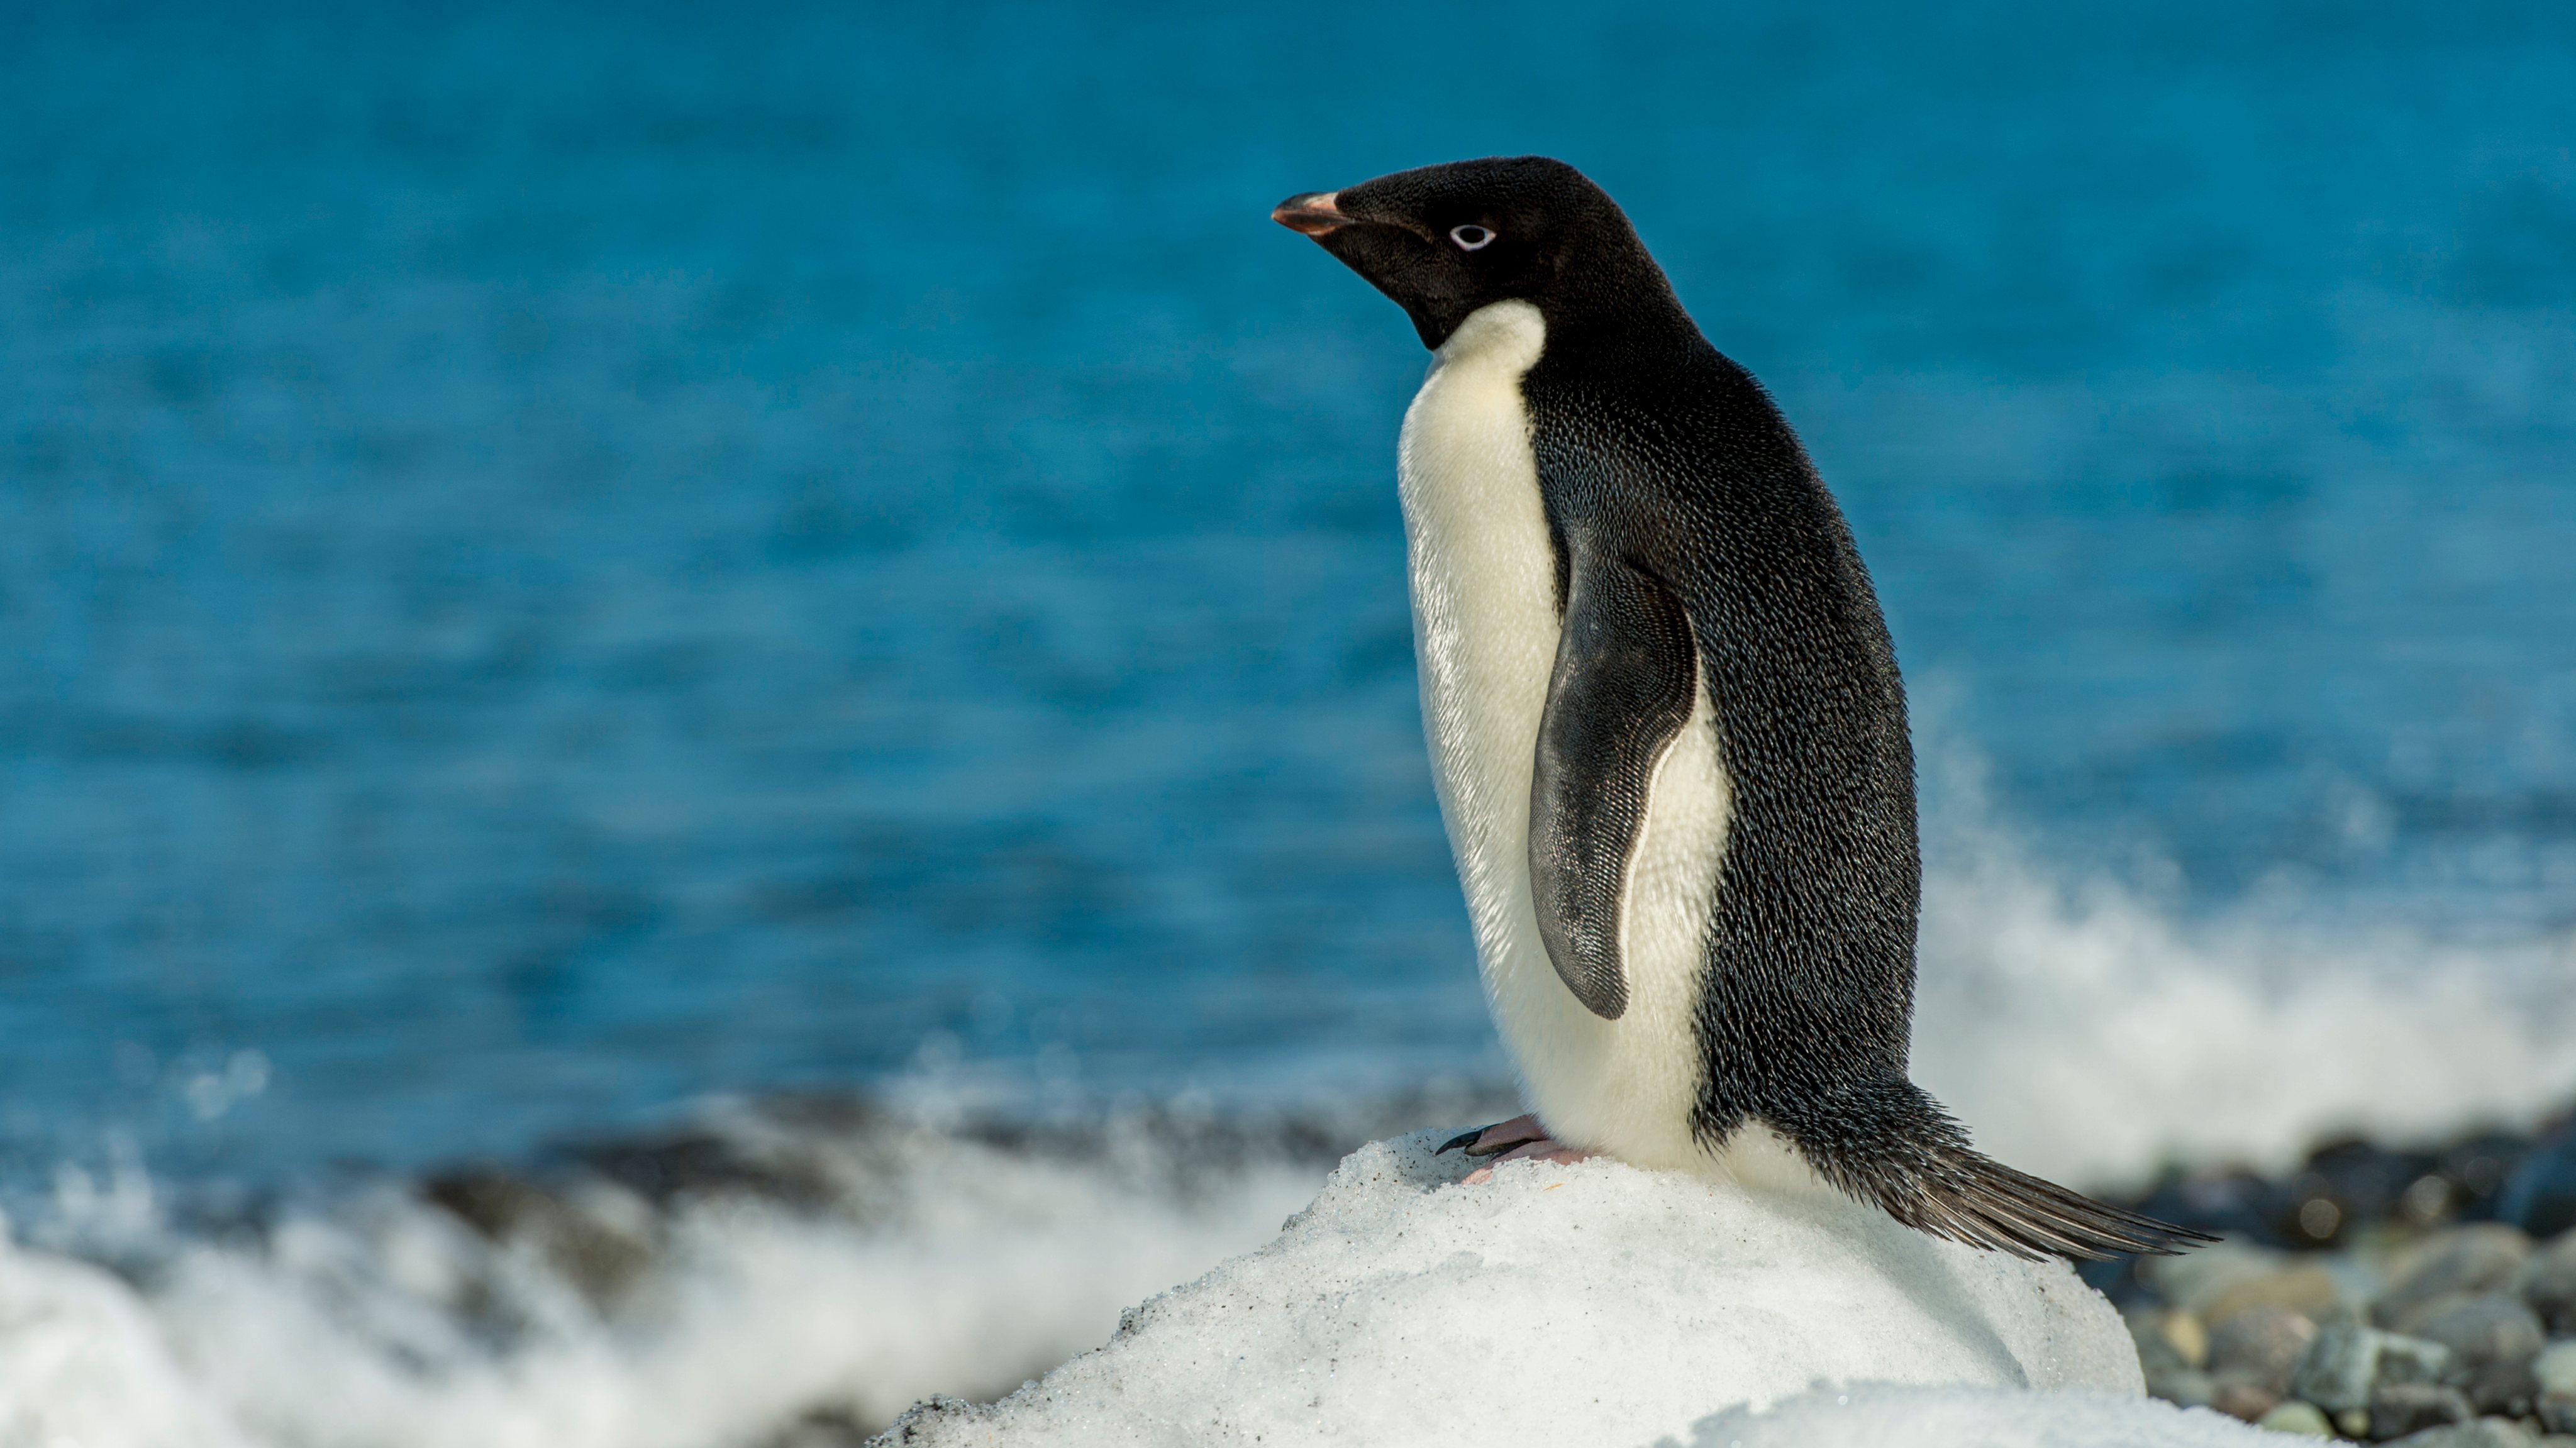 An Adelie penguin (Pygoscelis adeliae) is standing on a ice